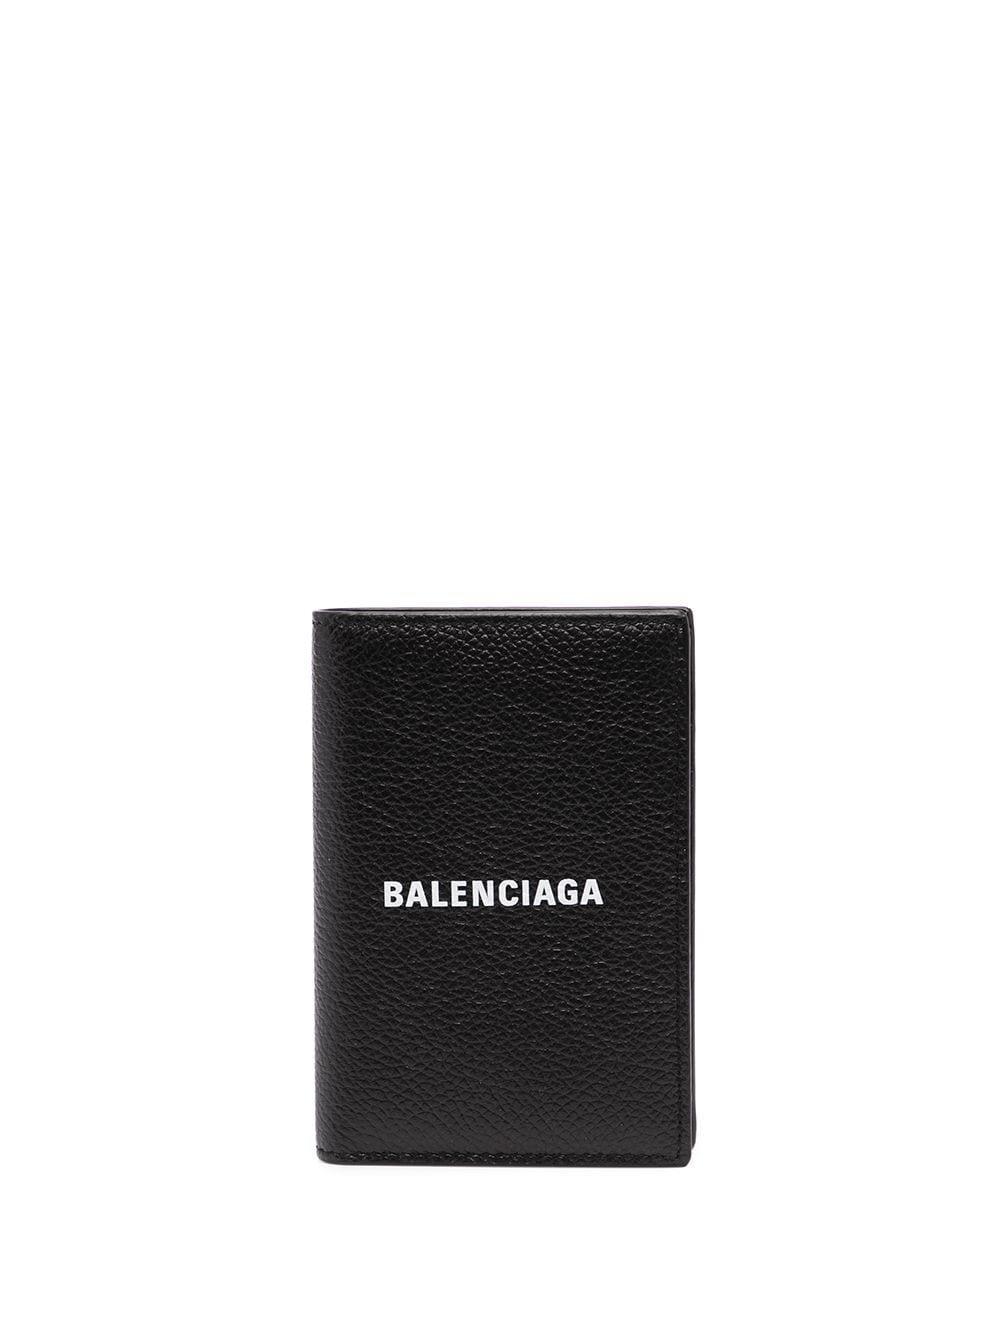 Balenciaga Leather Wallets Black for Men - Save 26% | Lyst